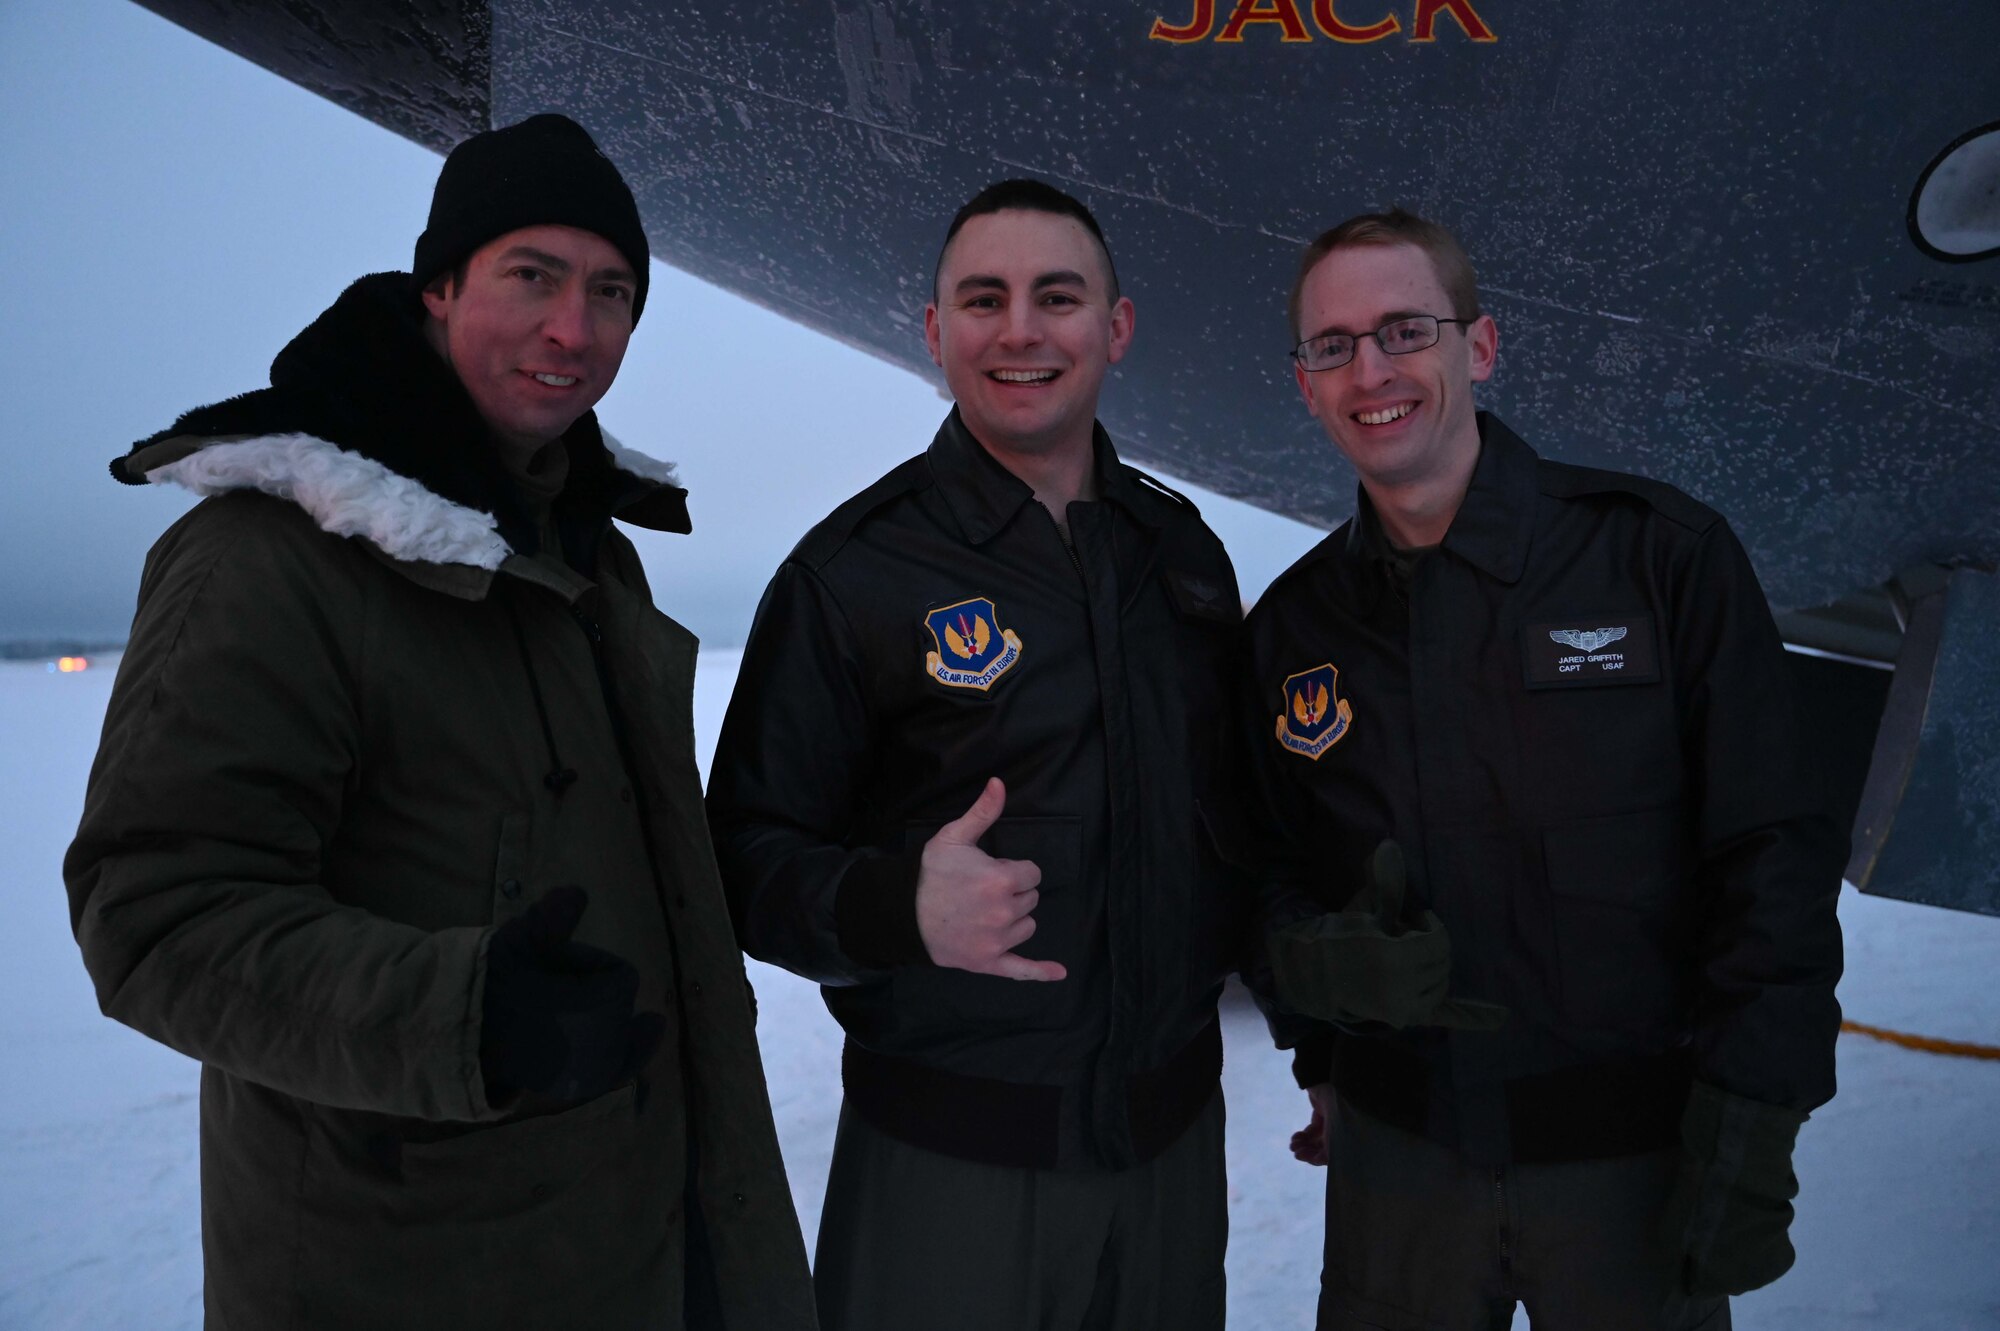 U.S. Air Force Maj. Bobby Strain, left, Maj. Jarrod Ebner, middle,  and Capt. Jared Griffith, 351st Air Refueling Squadron KC-135 Stratotanker aircraft pilots, perform a pre-flight brief prior to traveling to Rovianiemi, Finland for a refueling mission at Royal Air Force Mildenhall, England, Jan. 22, 2022. Ebner spent his birthday participating in a business effort between the 100th Air Refueling Wing and the Finnish Air Force. (U.S. Air Force photo by Airman 1st Class Viviam Chiu)